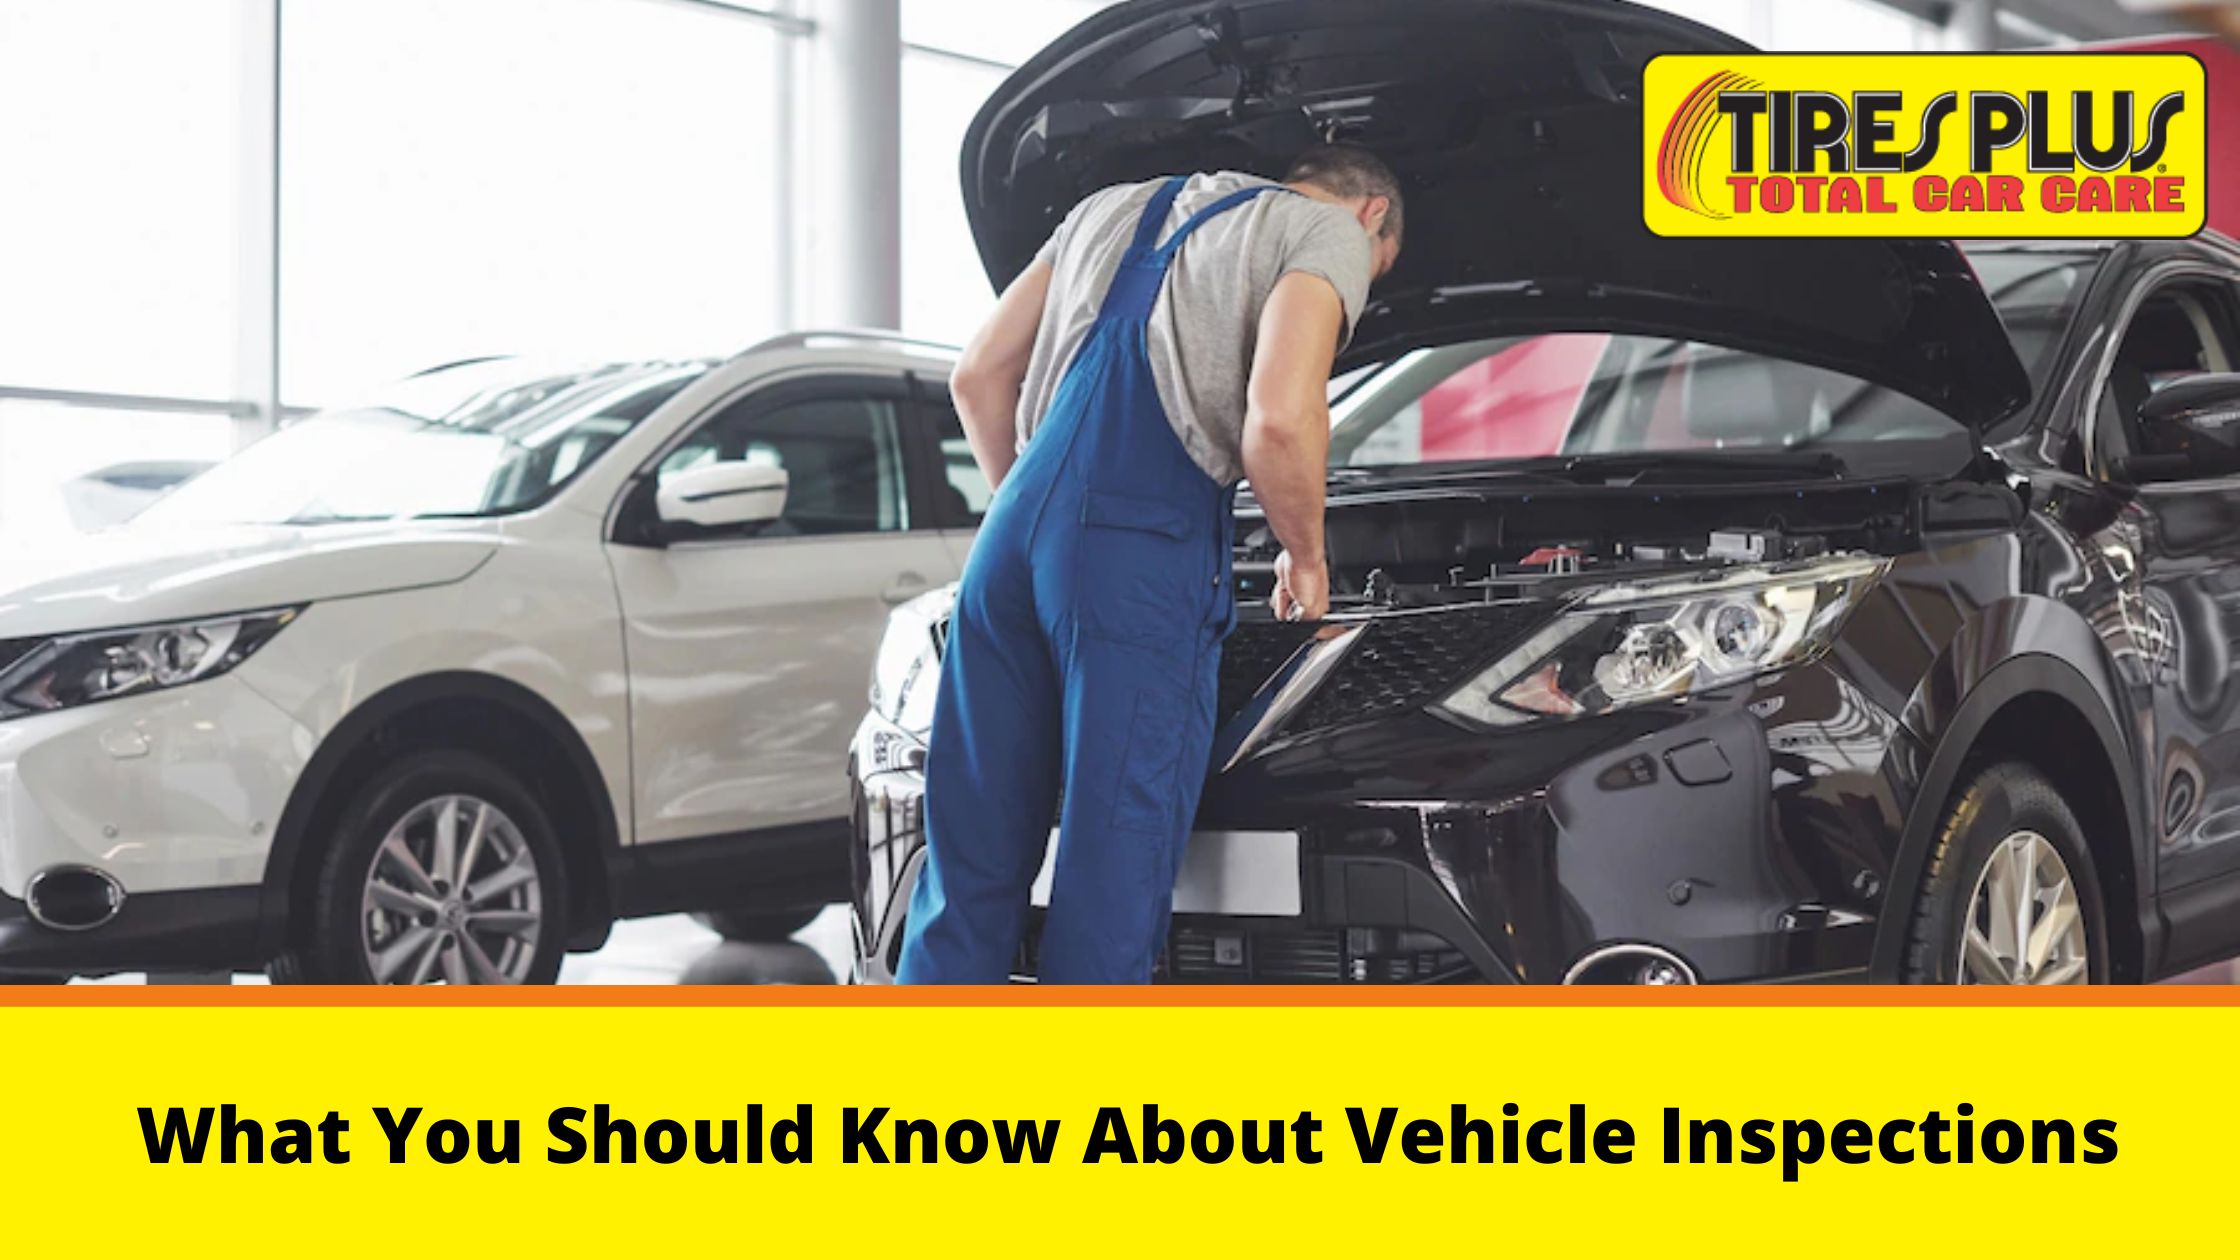 What You Should Know About Vehicle Inspections